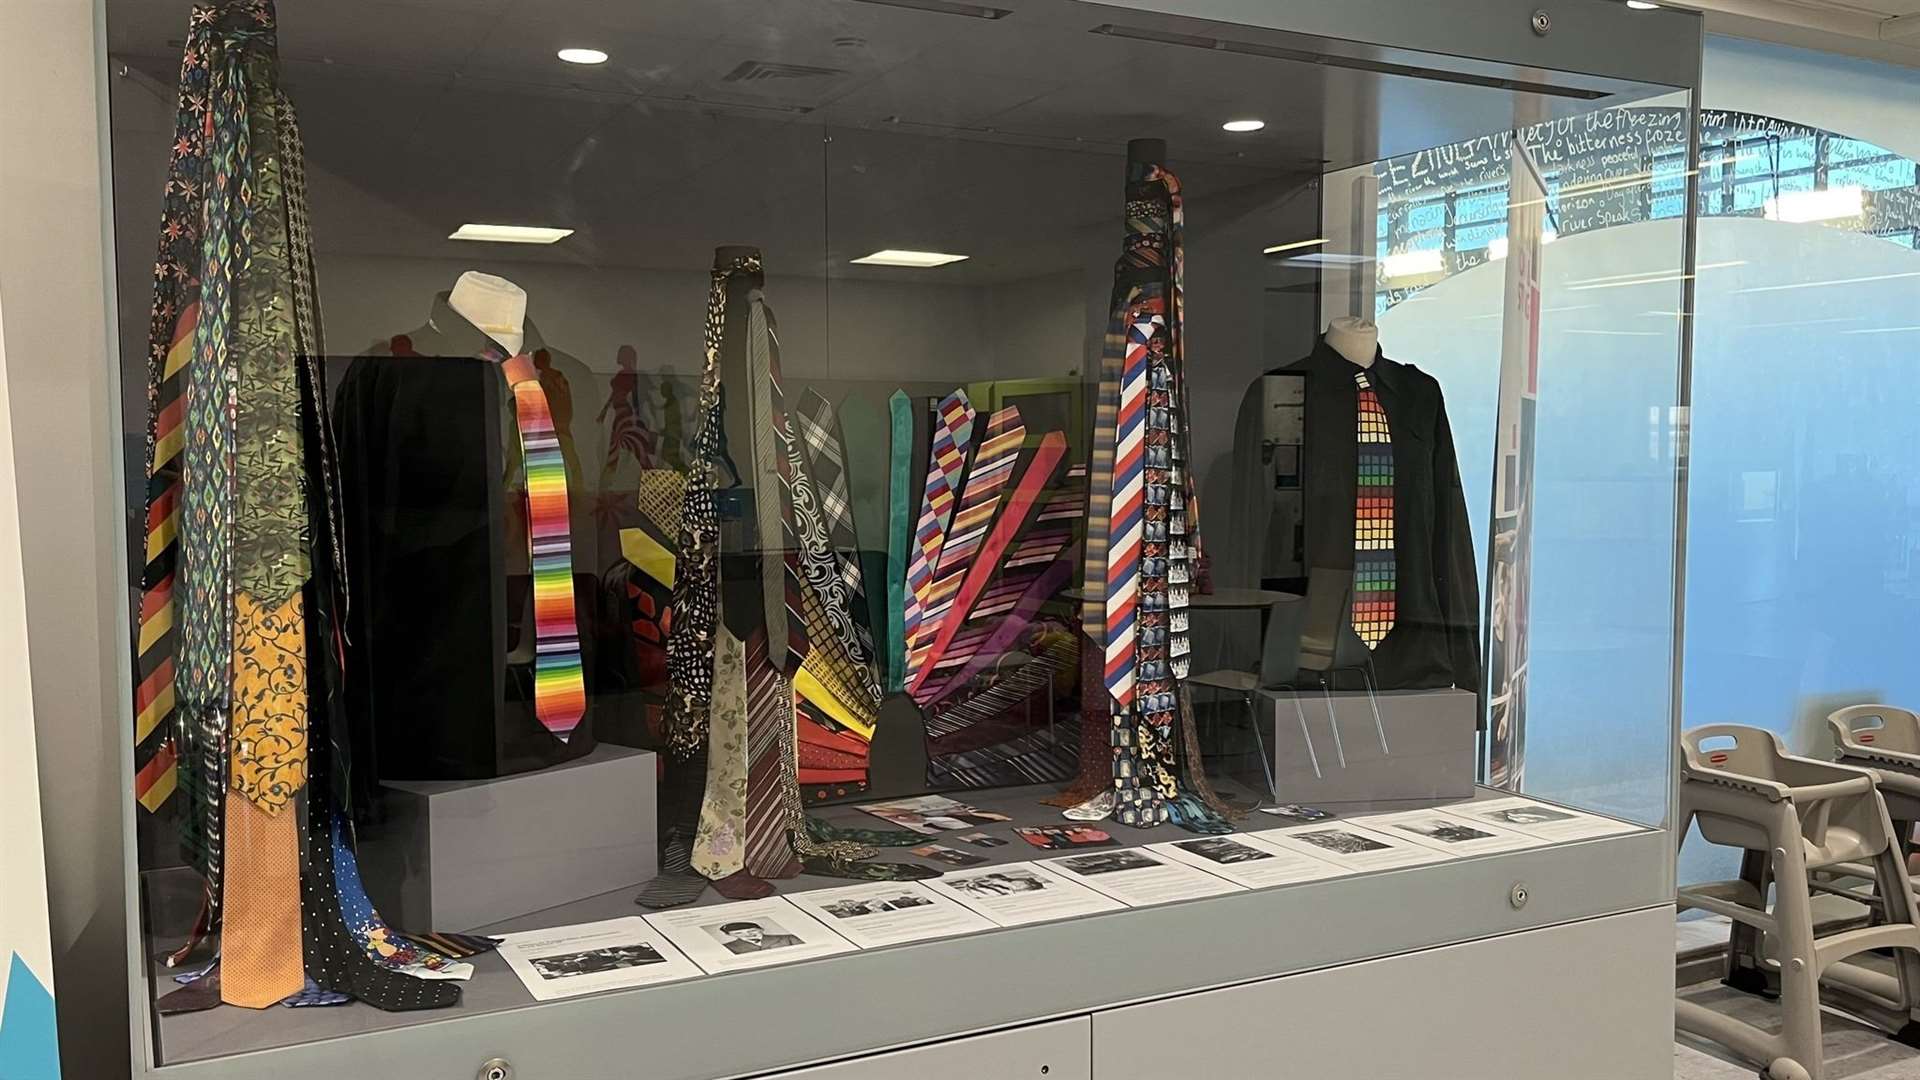 DJ Renton's ties are being auctioned in aid of charity by Ellon Academy. Picture: Ellon Academy.